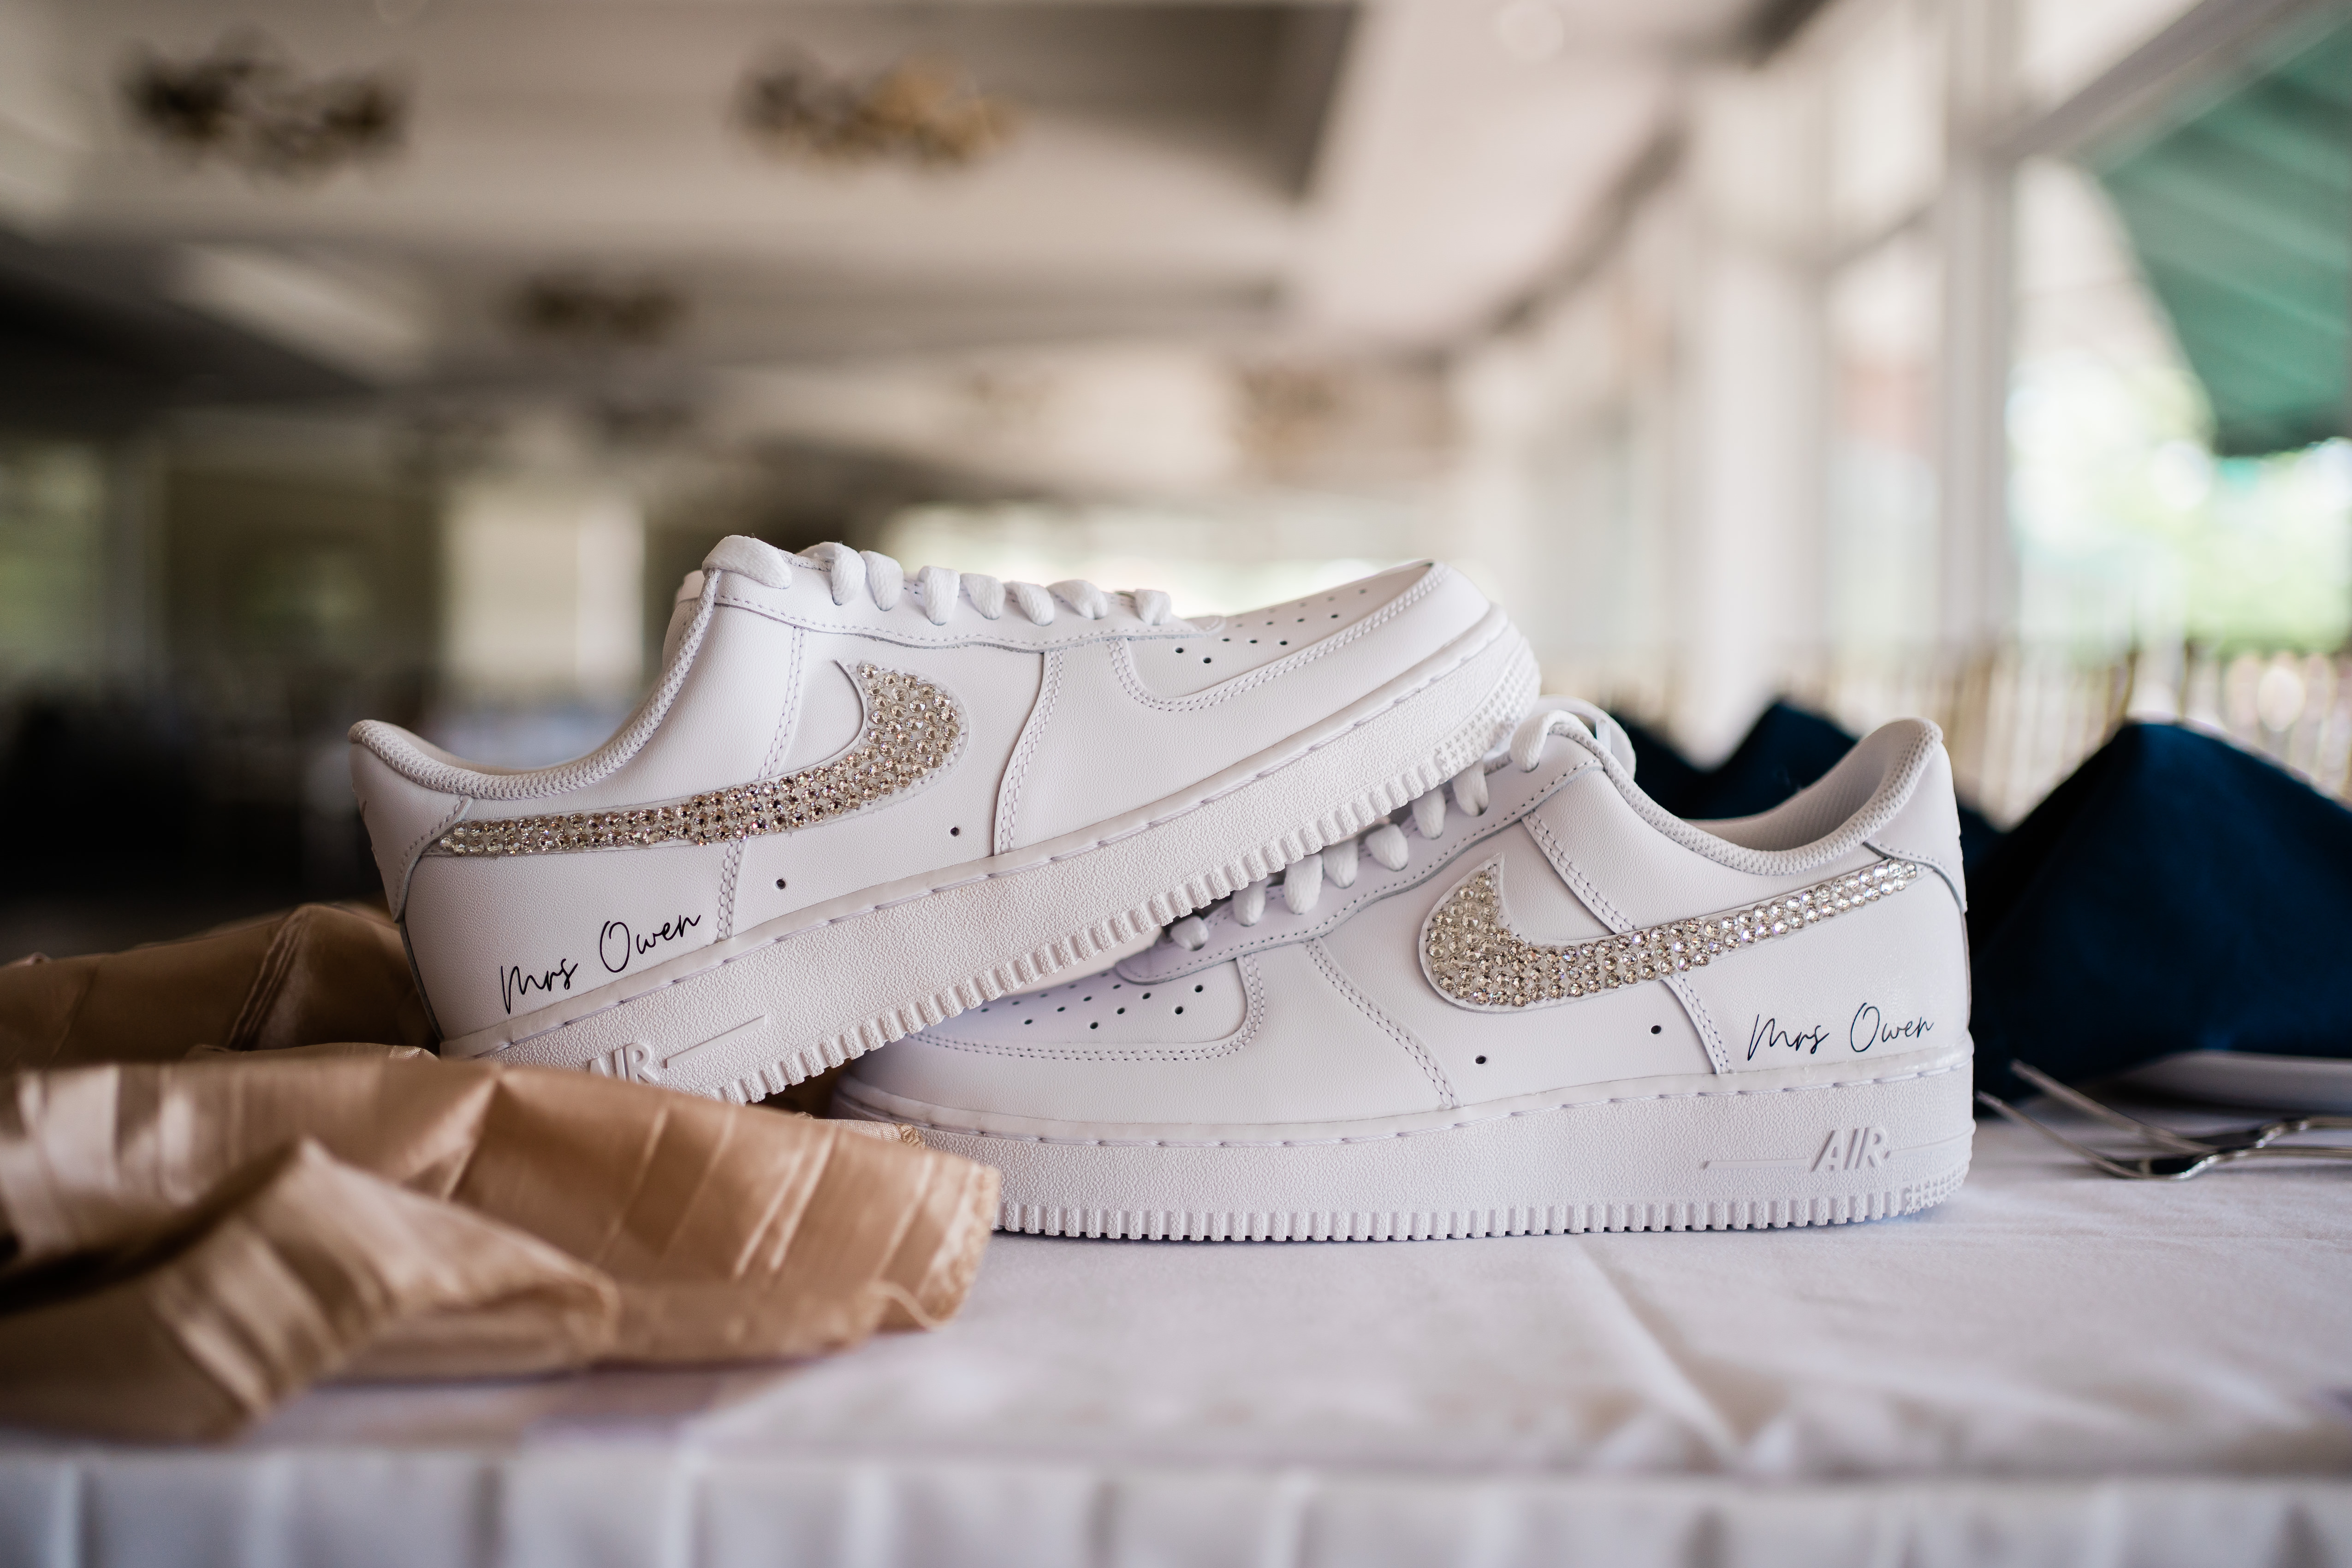 Fort Wayne wedding photographers capture Nike Air Force One's for bridal shoes